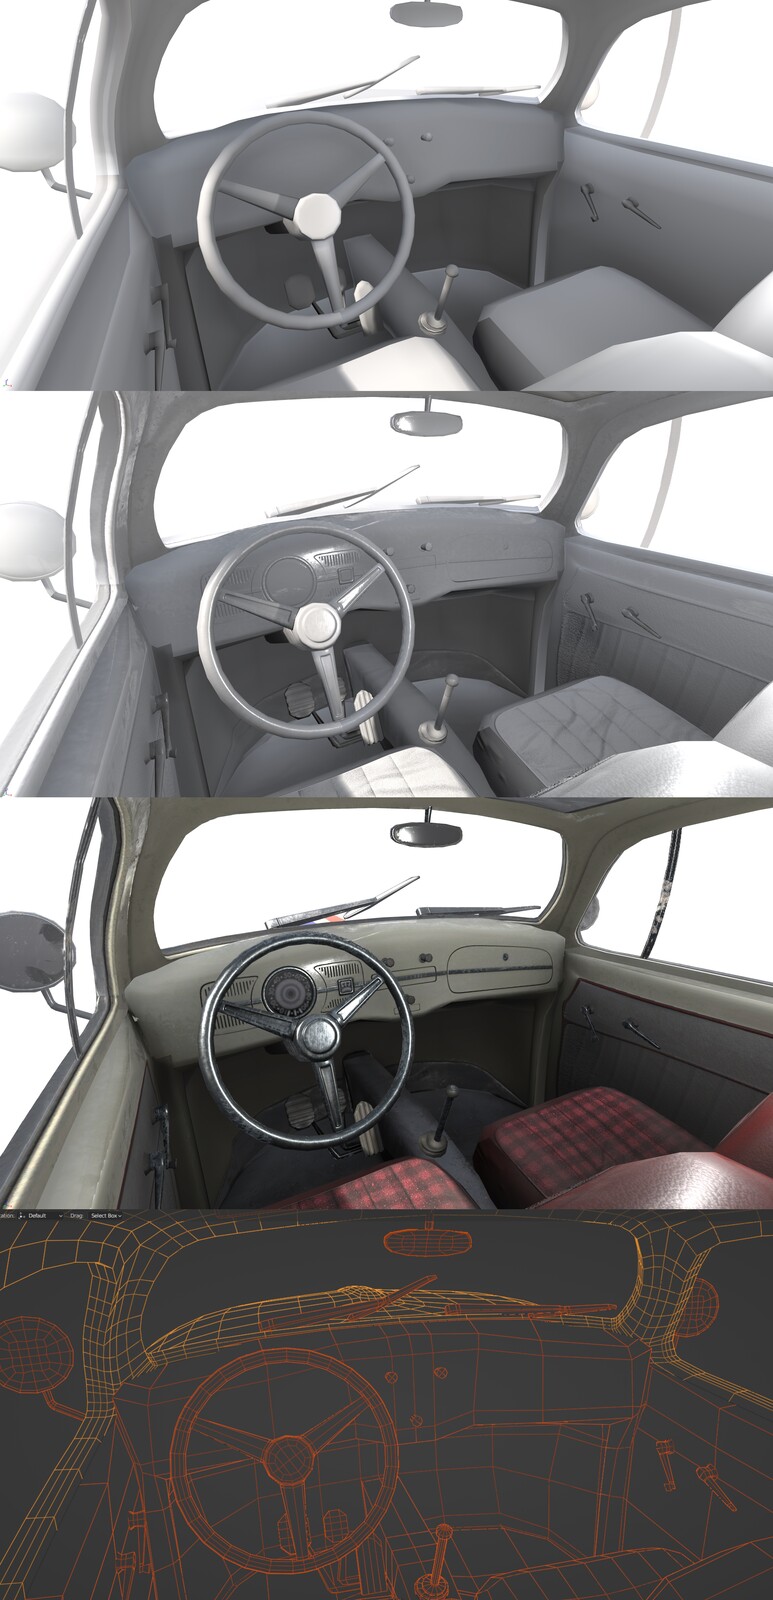 An interior view of the base model, the model with normal details, the model textured and the model in wireframe